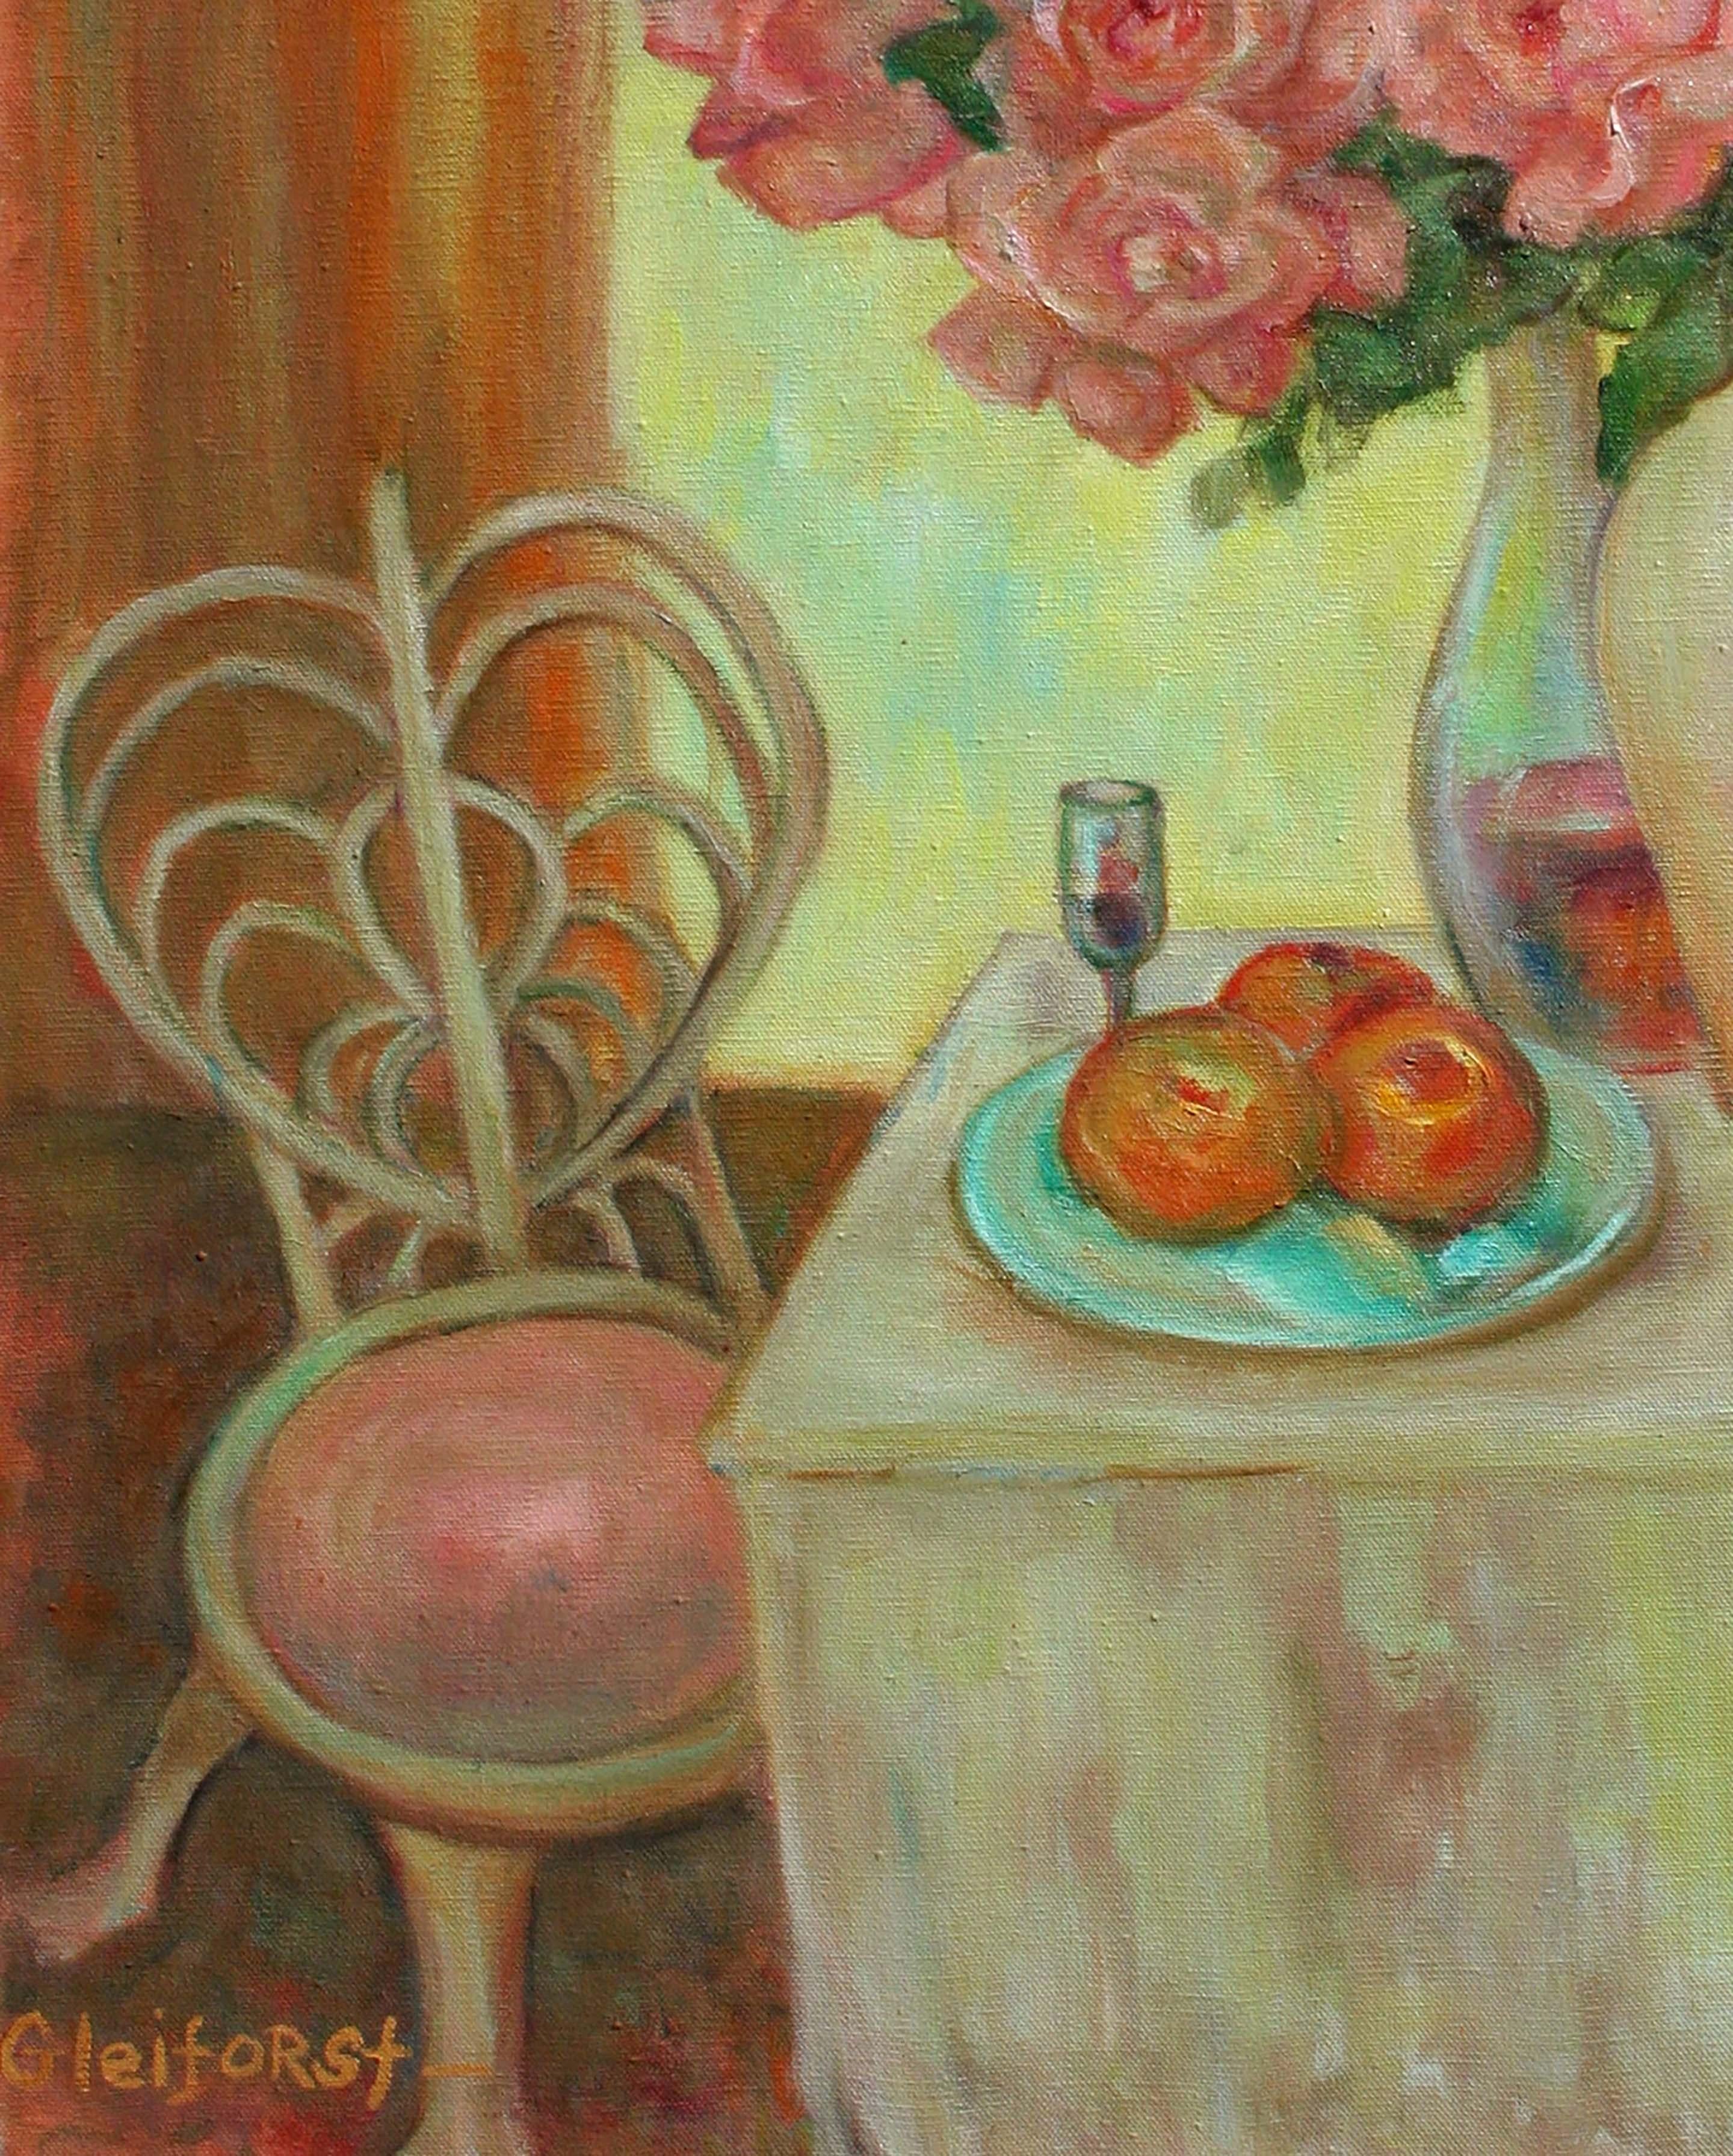 centerpiece in many a still life